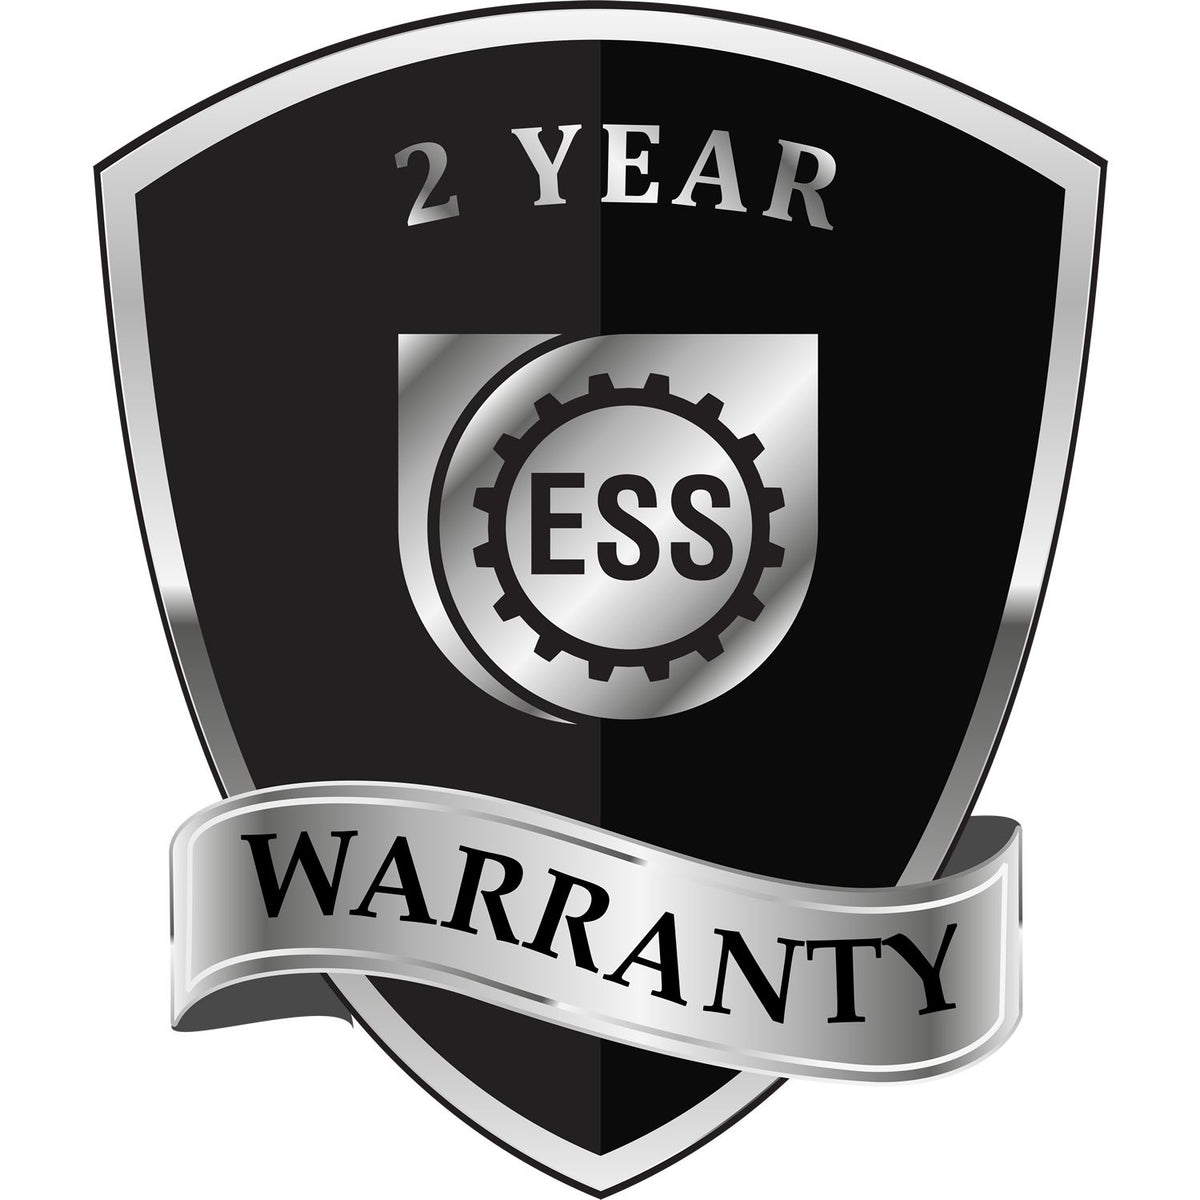 A badge or emblem showing a warranty icon for the Long Reach South Dakota PE Seal